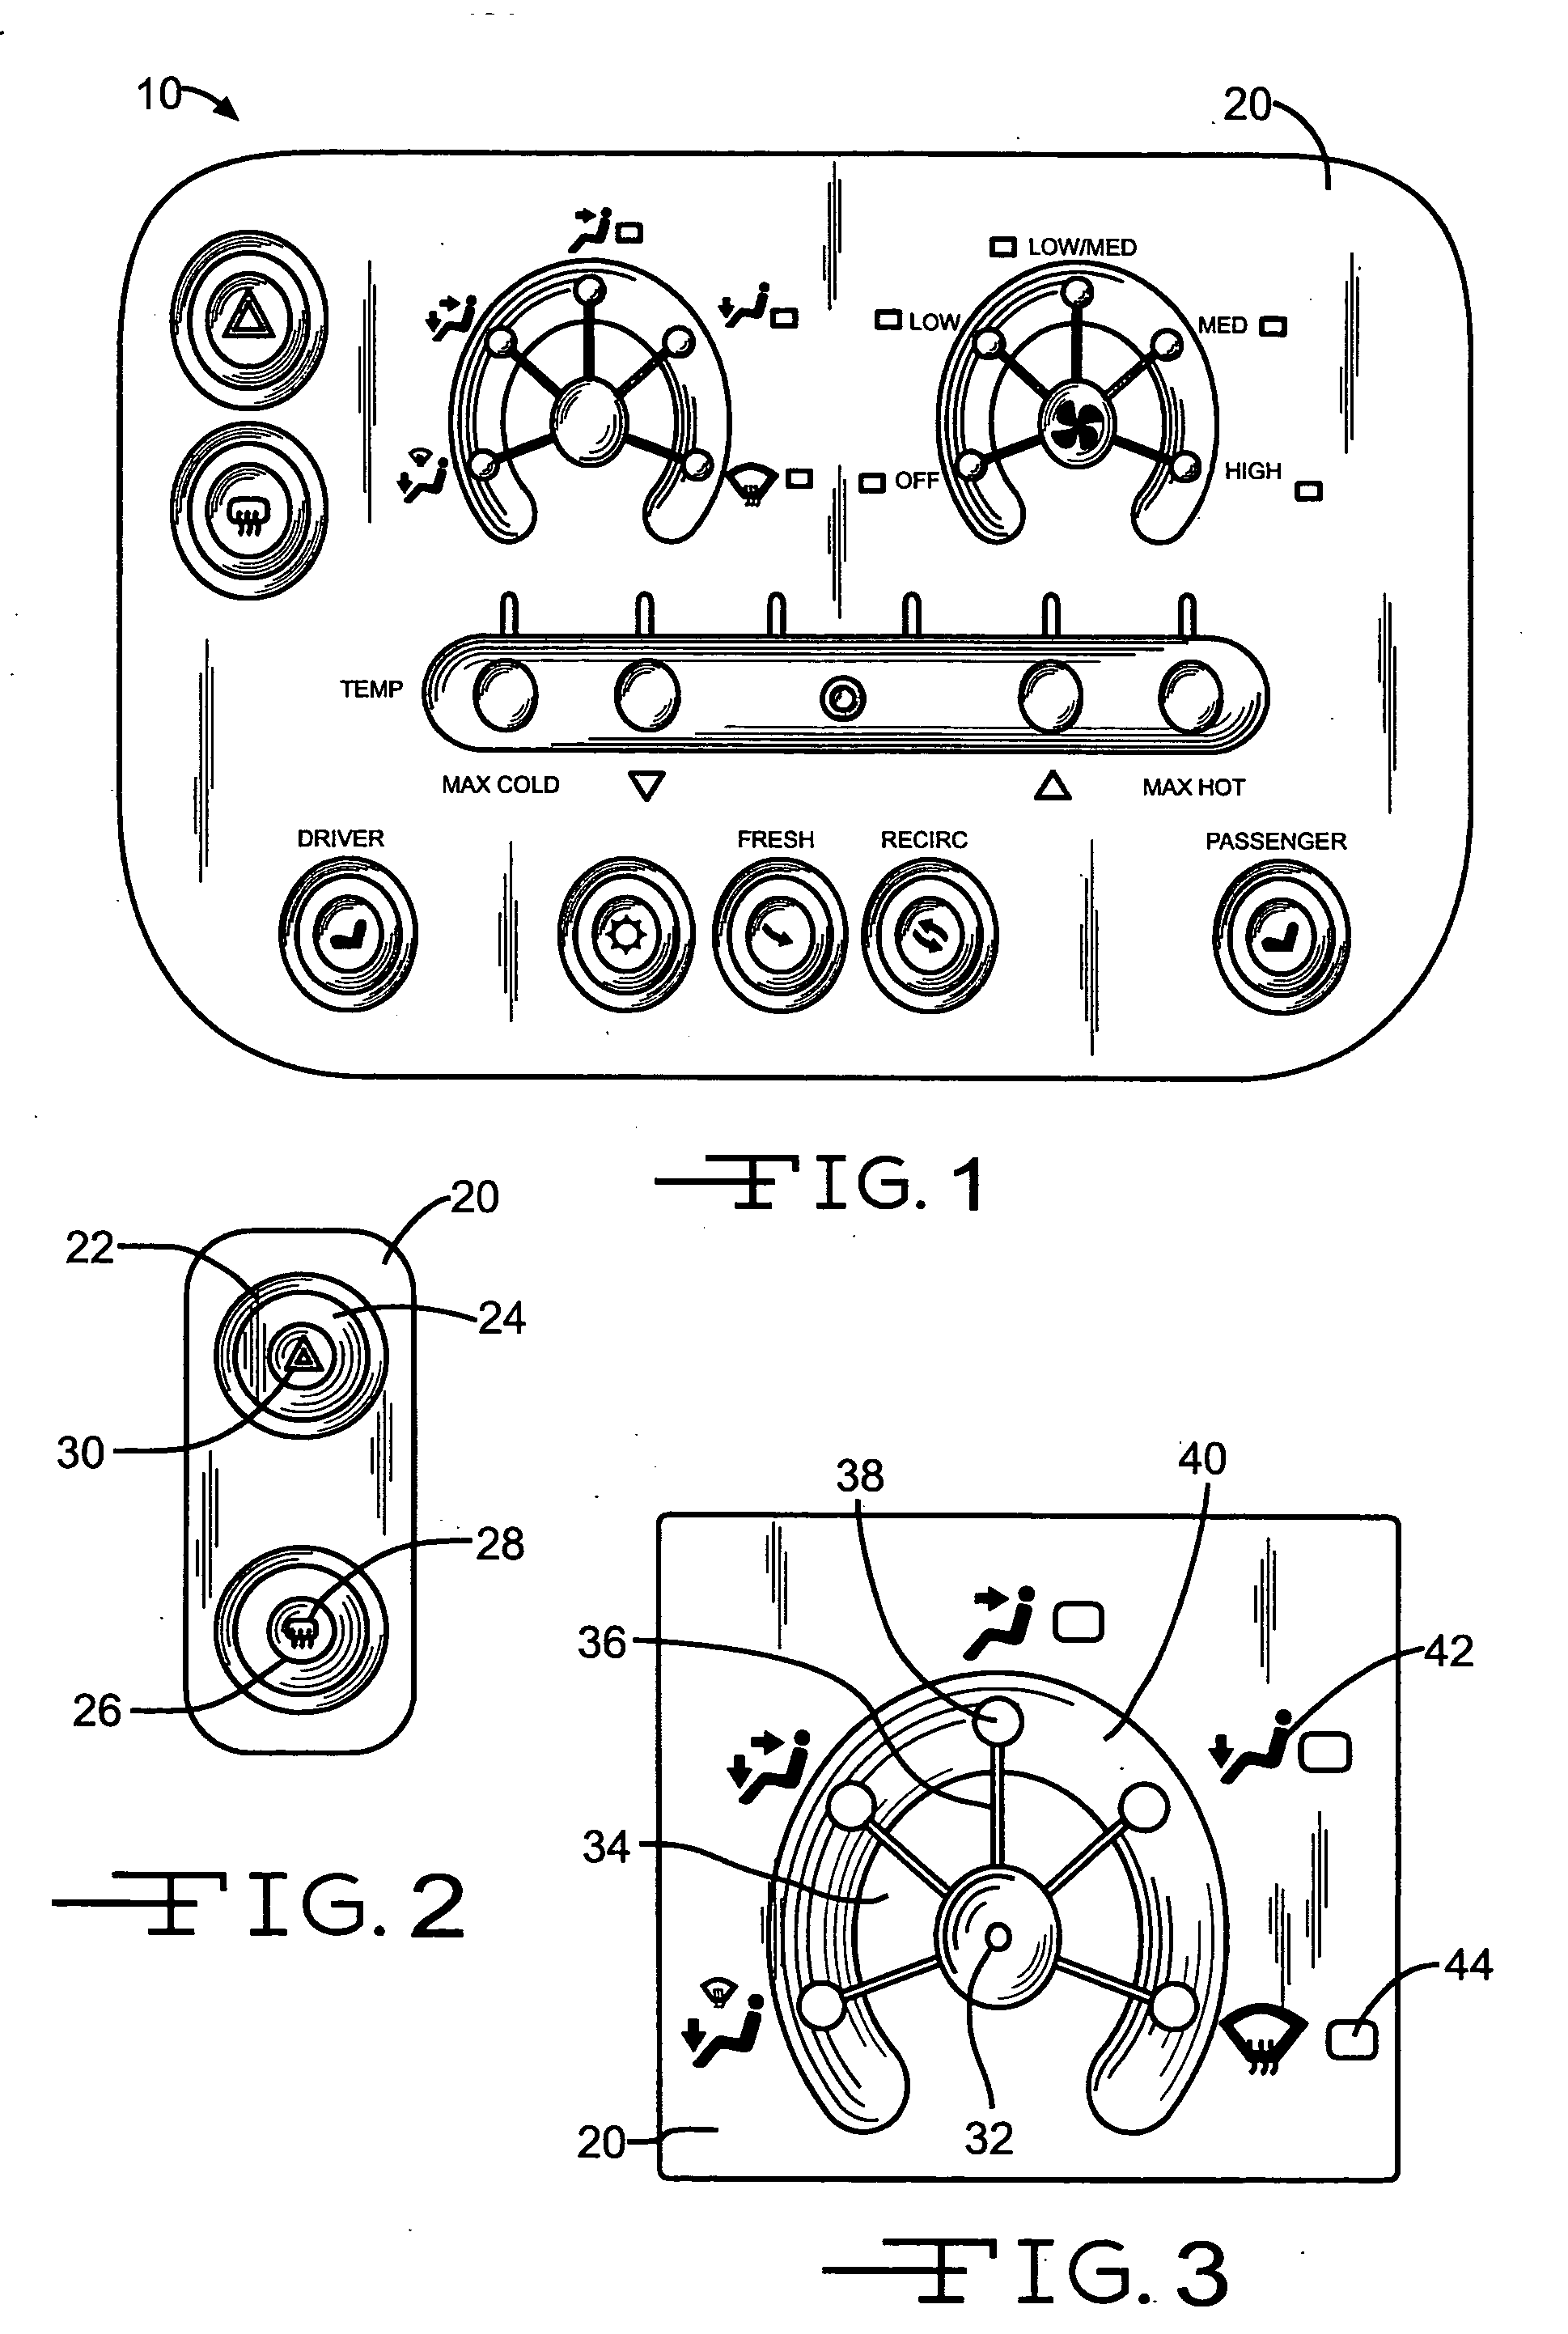 Integrated center stack switch bank for motor vehicle